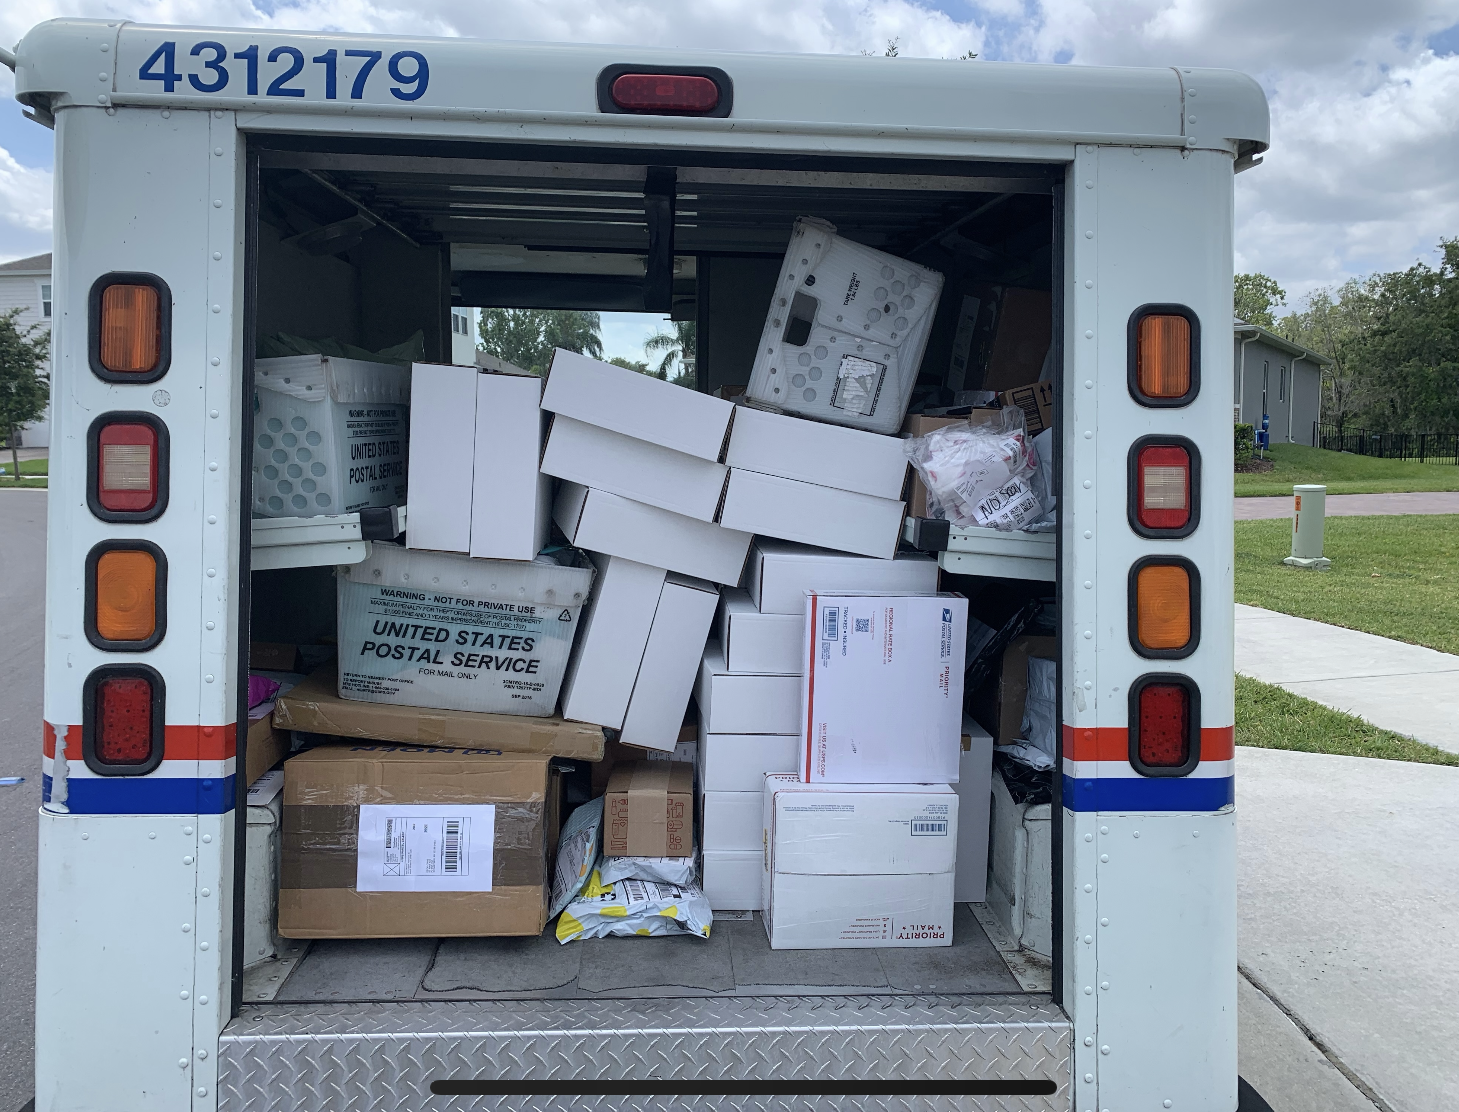 On Tim Rice’s last day of work, he snapped a photo of his mail truck, which had more packages than letters.